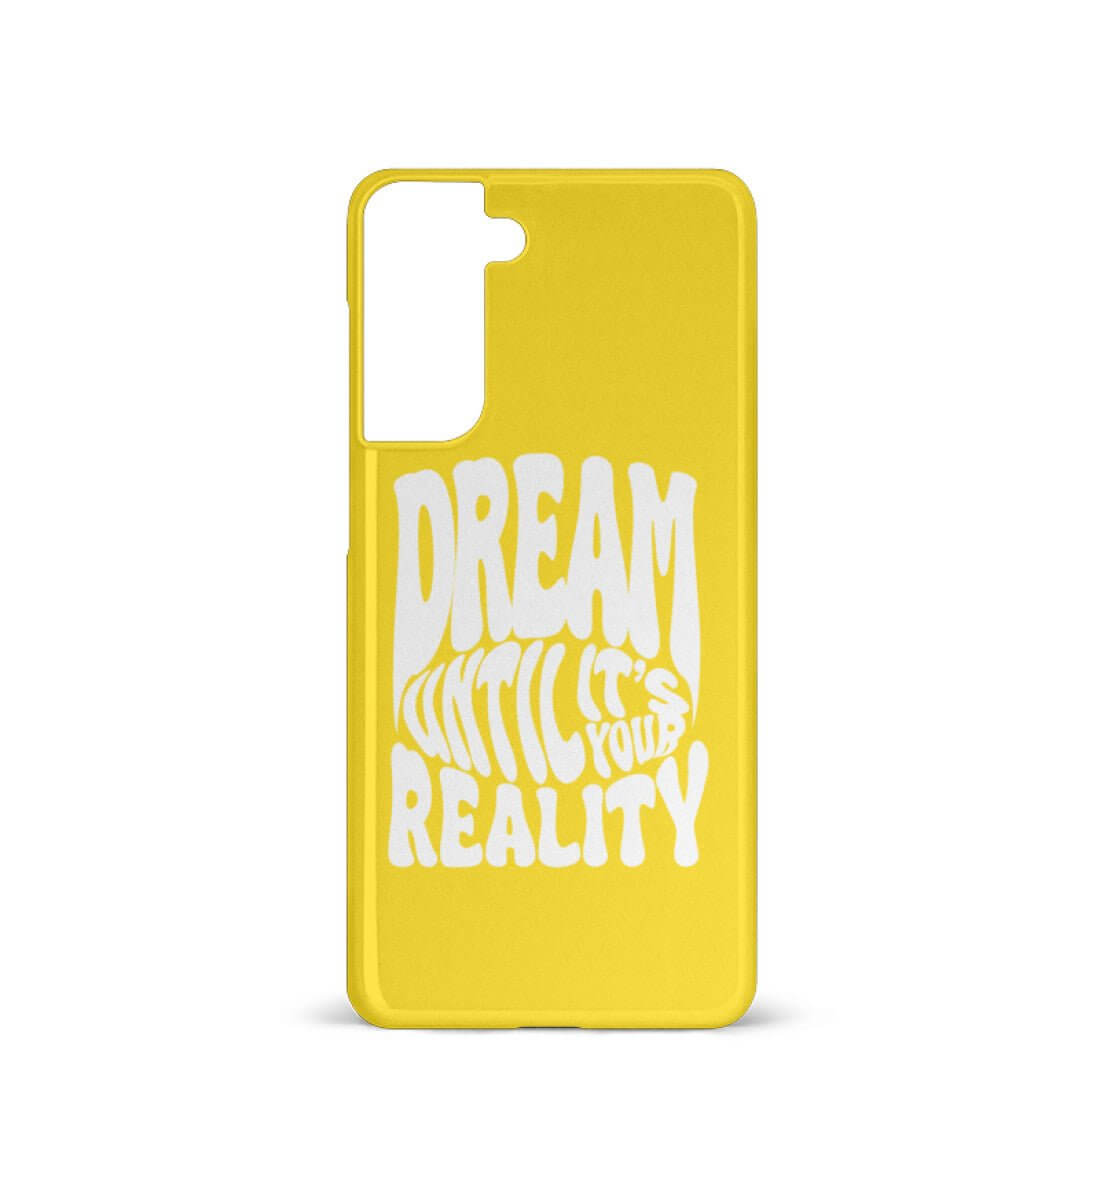 'DREAM UNTIL IT'S YOUR REALITY' - Samsung Galaxy S21 Handyhülle - GODVIBES